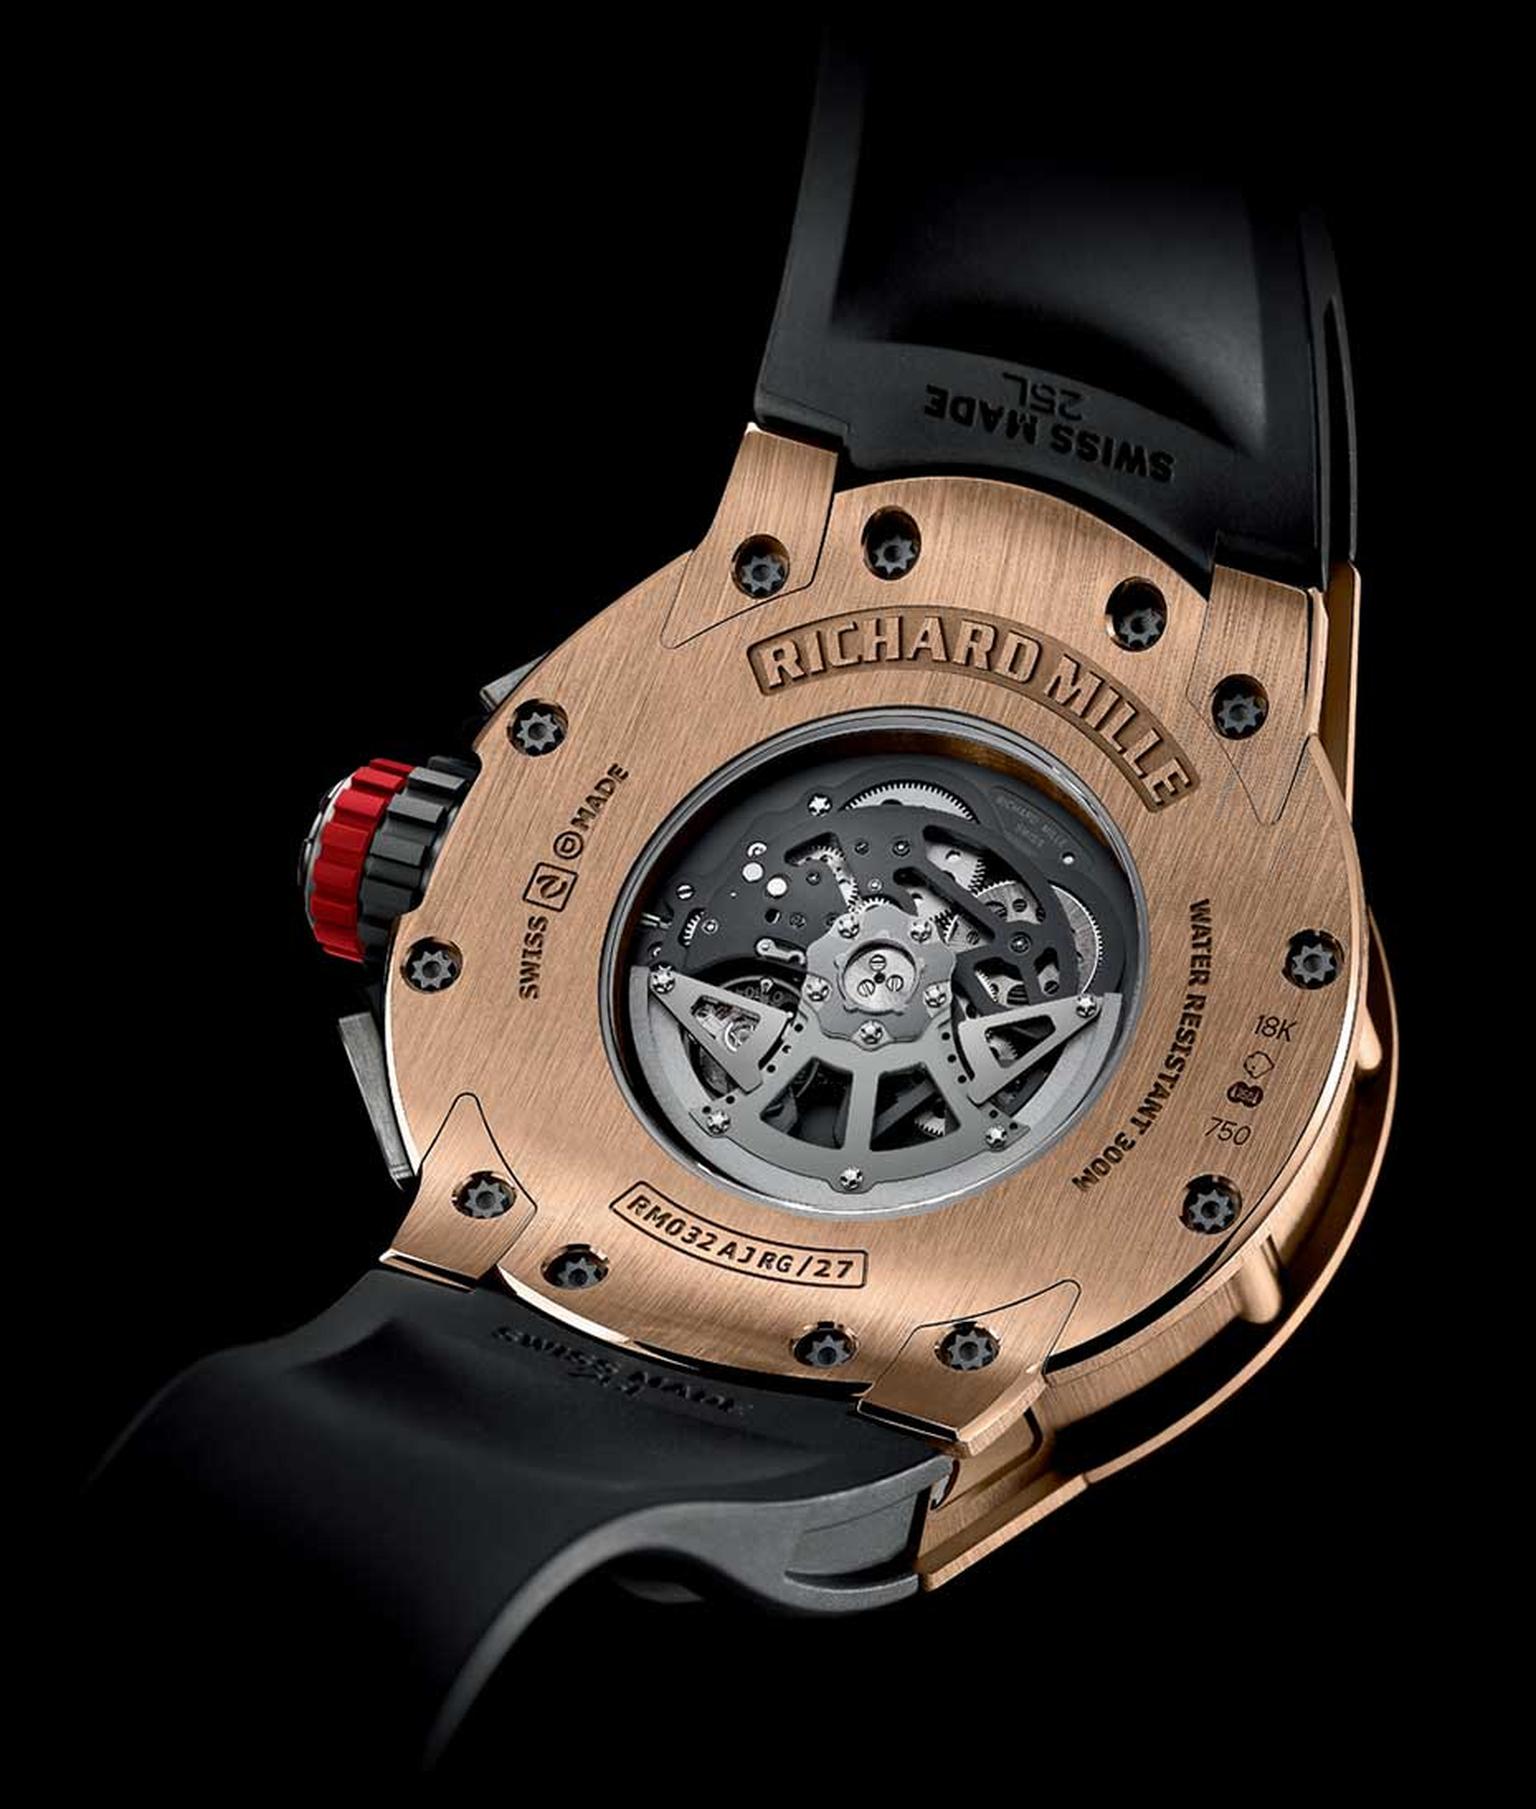 The reverse of the new Richard Mille RM 032 automatic chronograph diver's watch in red gold